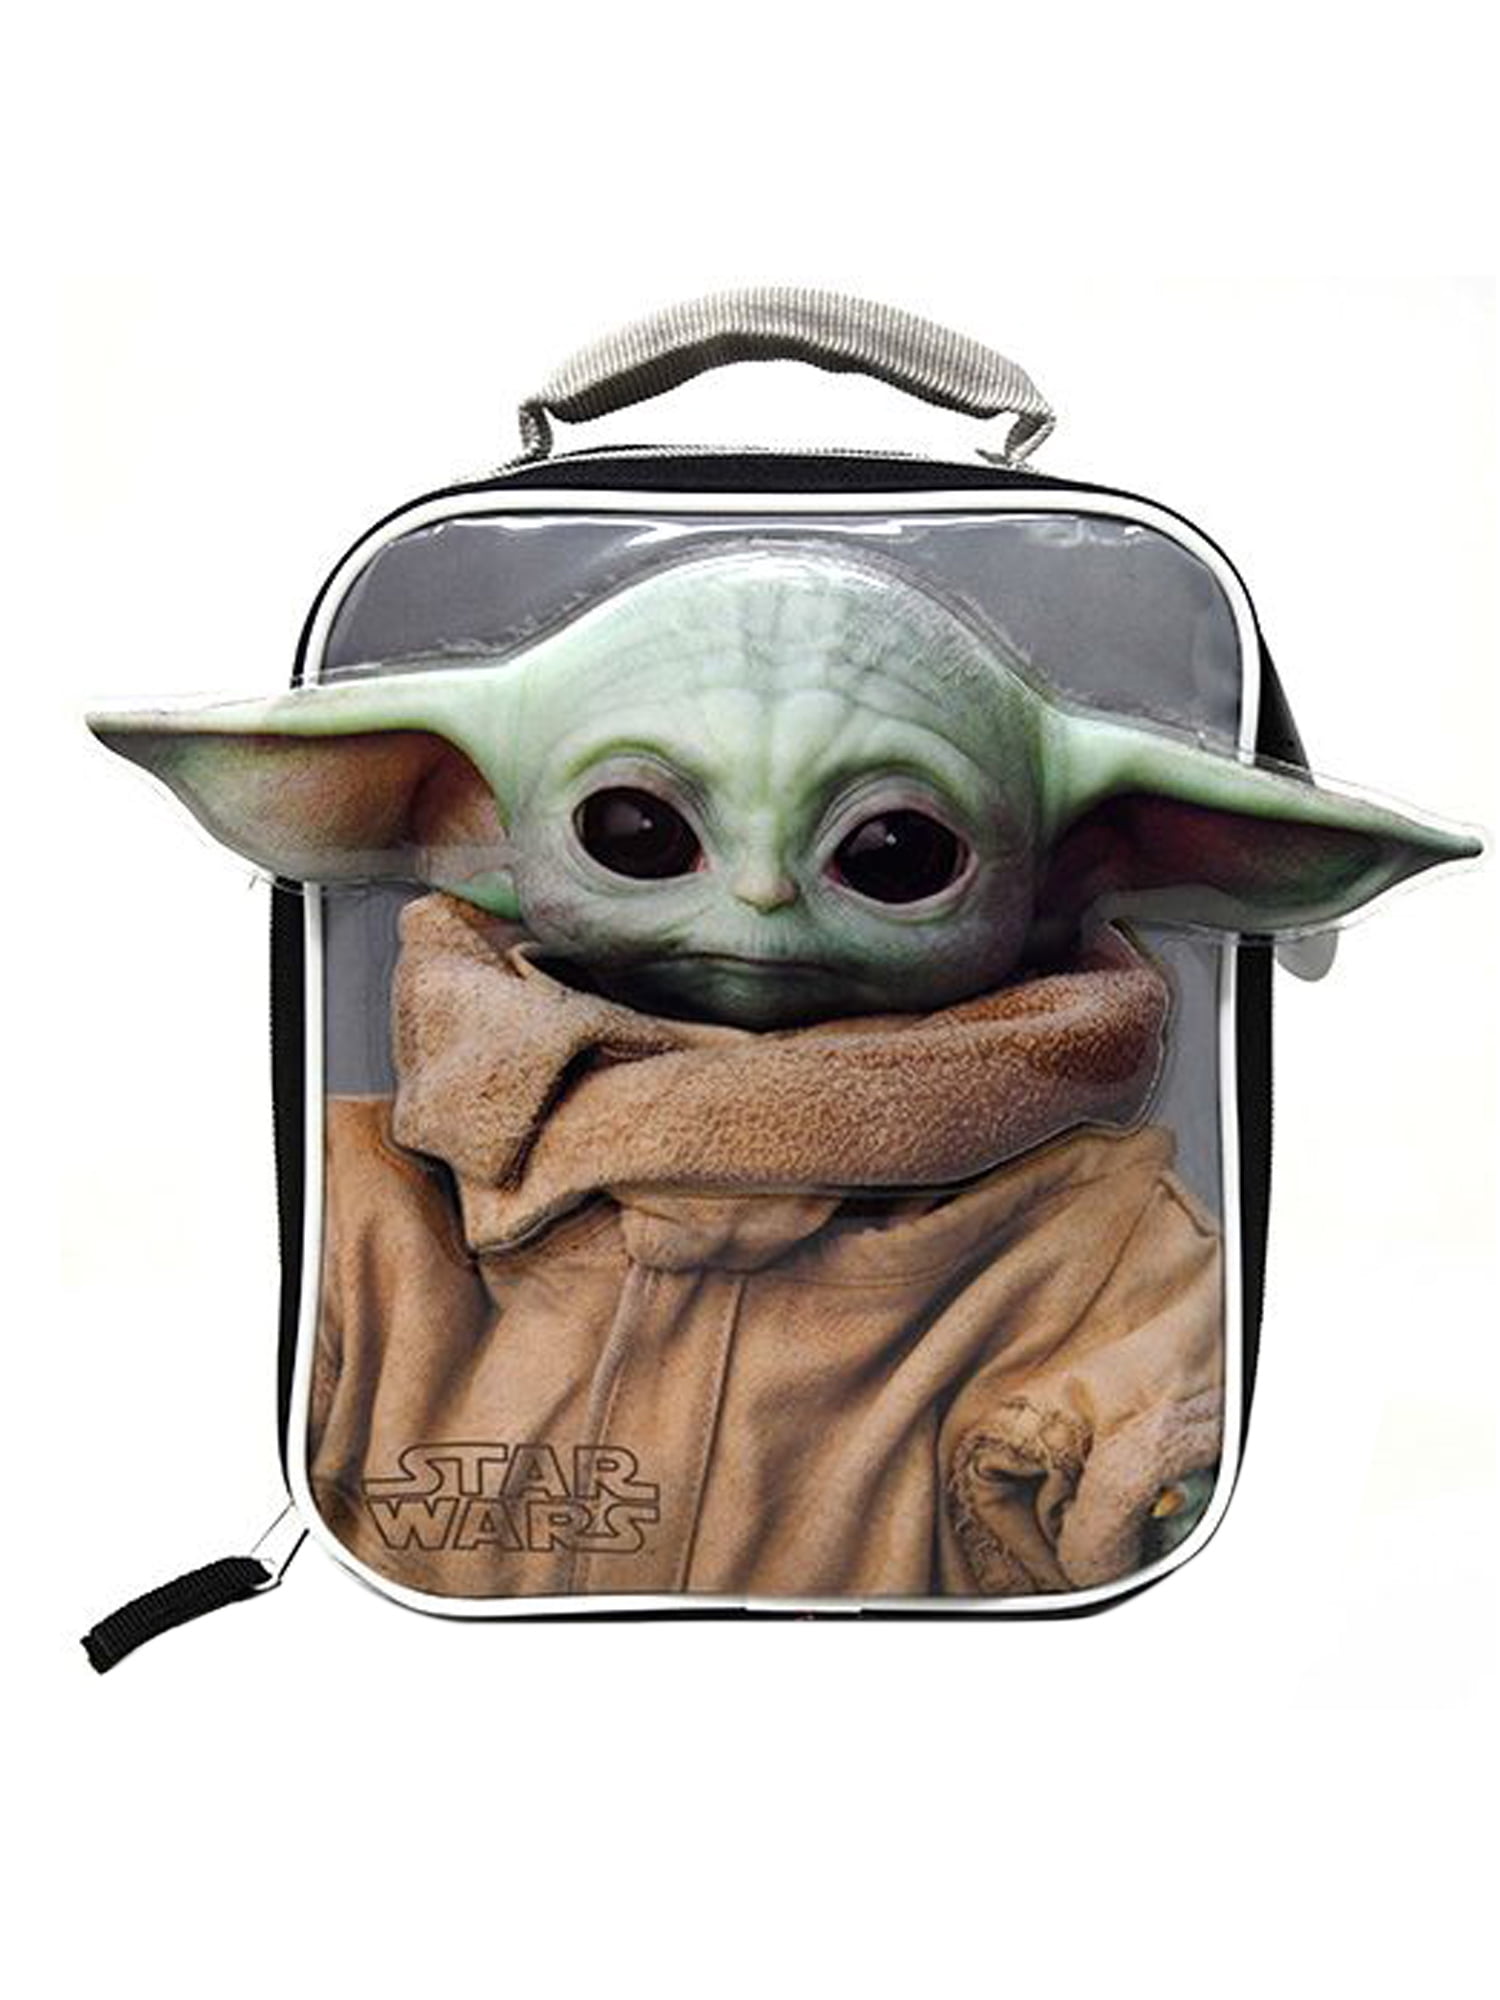 The Child Star Wars Lunch Box New with Tags Details about   Super Cute!! 